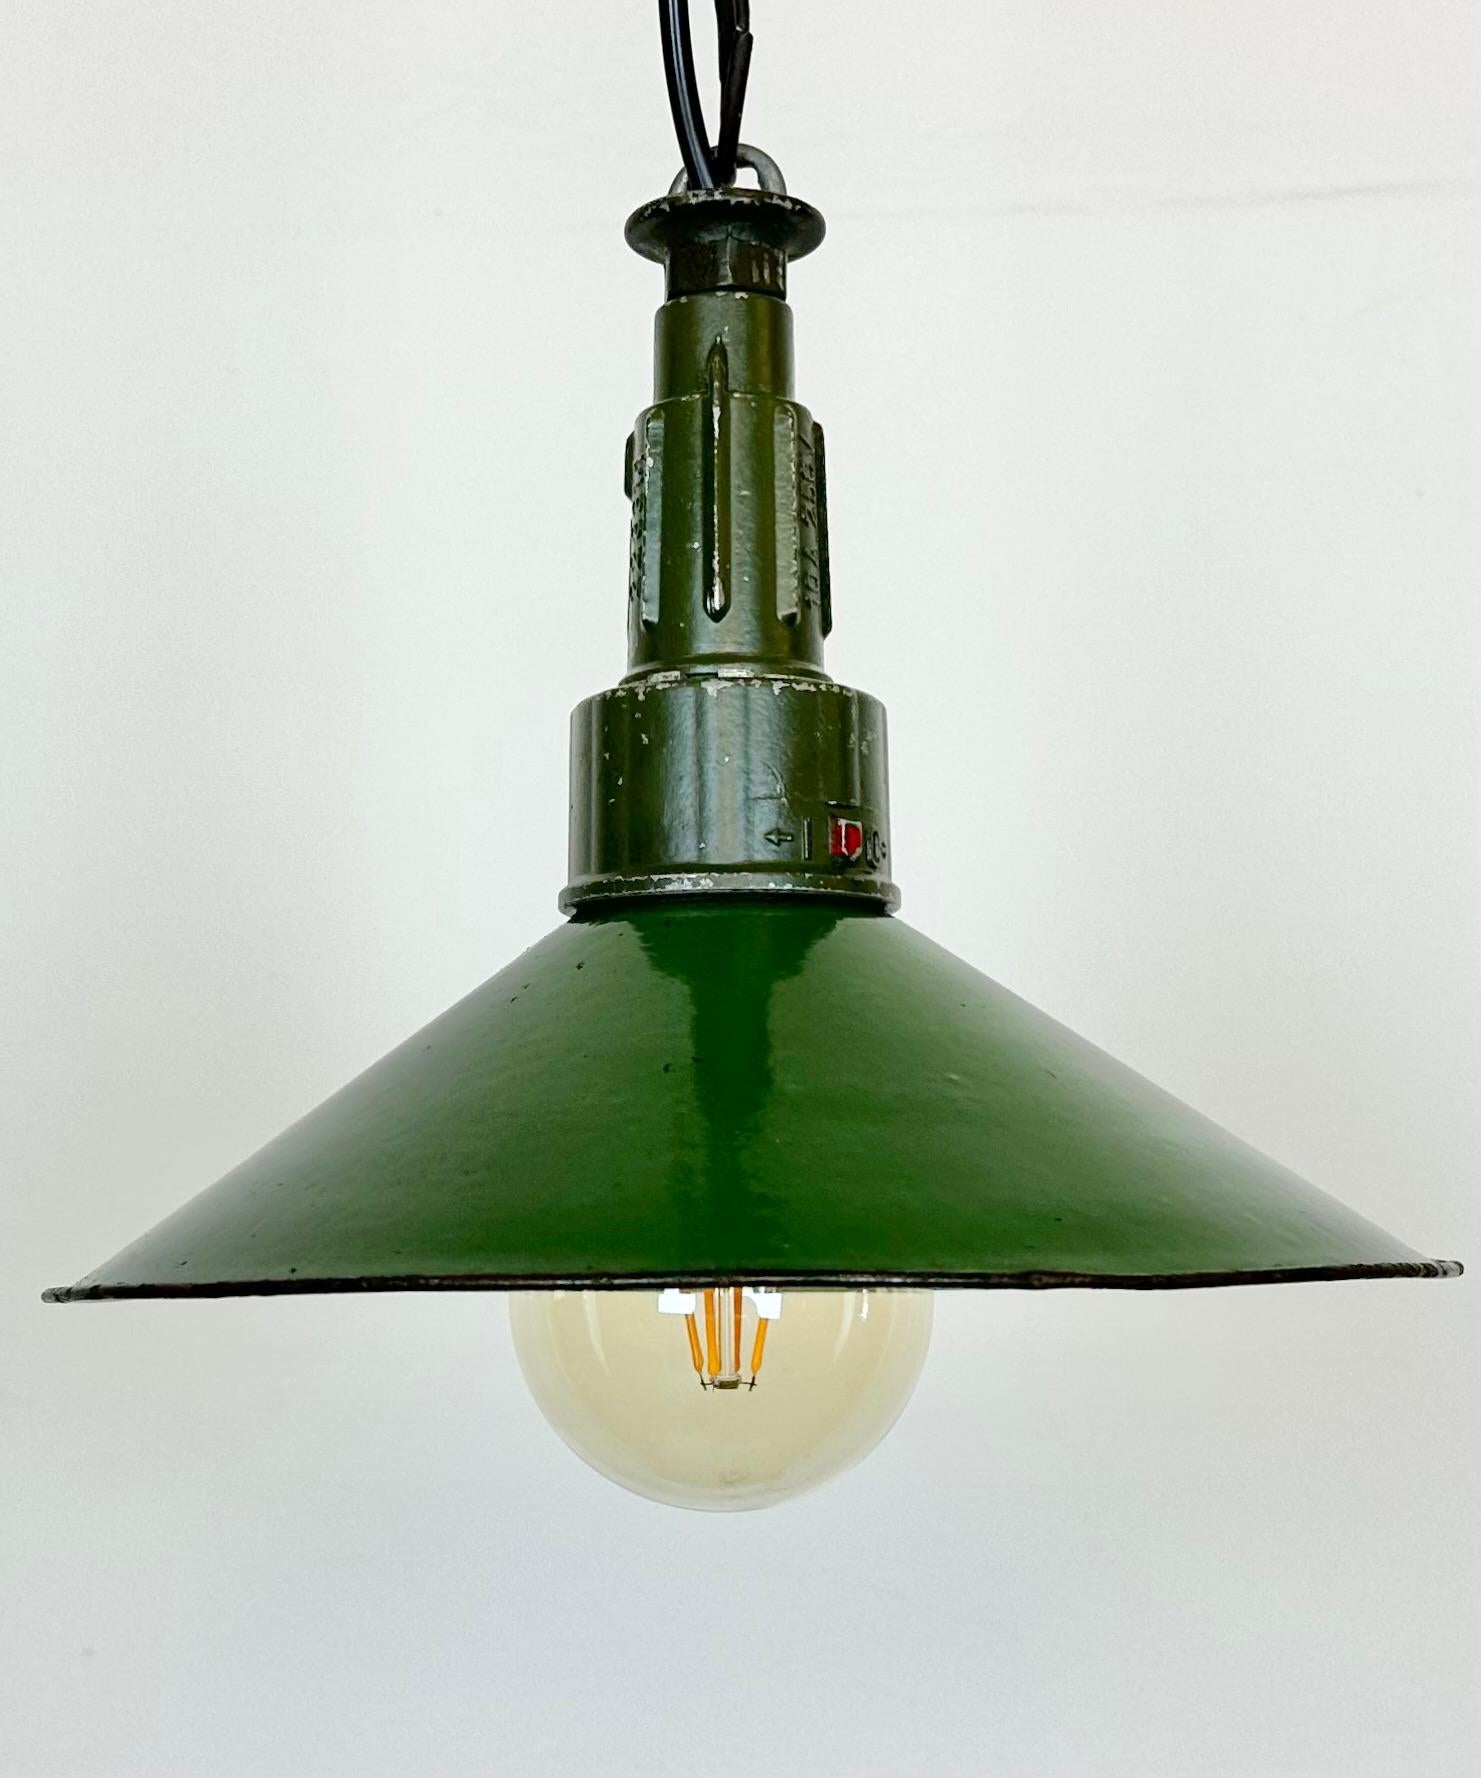 Polish Industrial Green Enamel Military Pendant Lamp with Cast Aluminium Top, 1960s For Sale